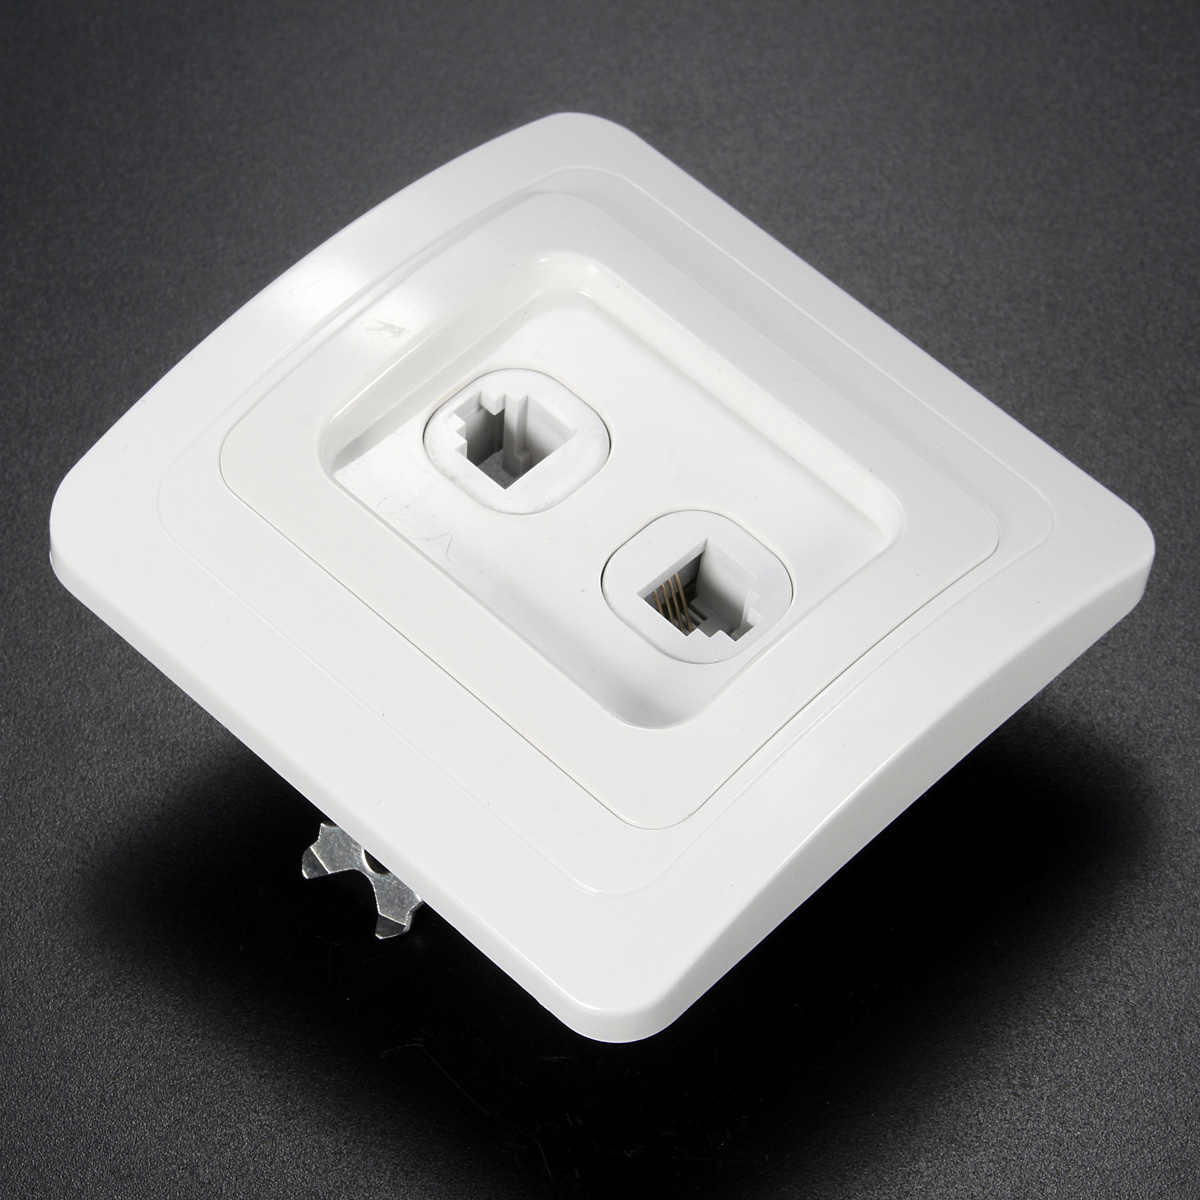 RJ11-Electric-Wall-Station-Socket-Telephone-Phone-Dual-Outlet-Panel-Face-Plate-Socket-Connector-1399685-3